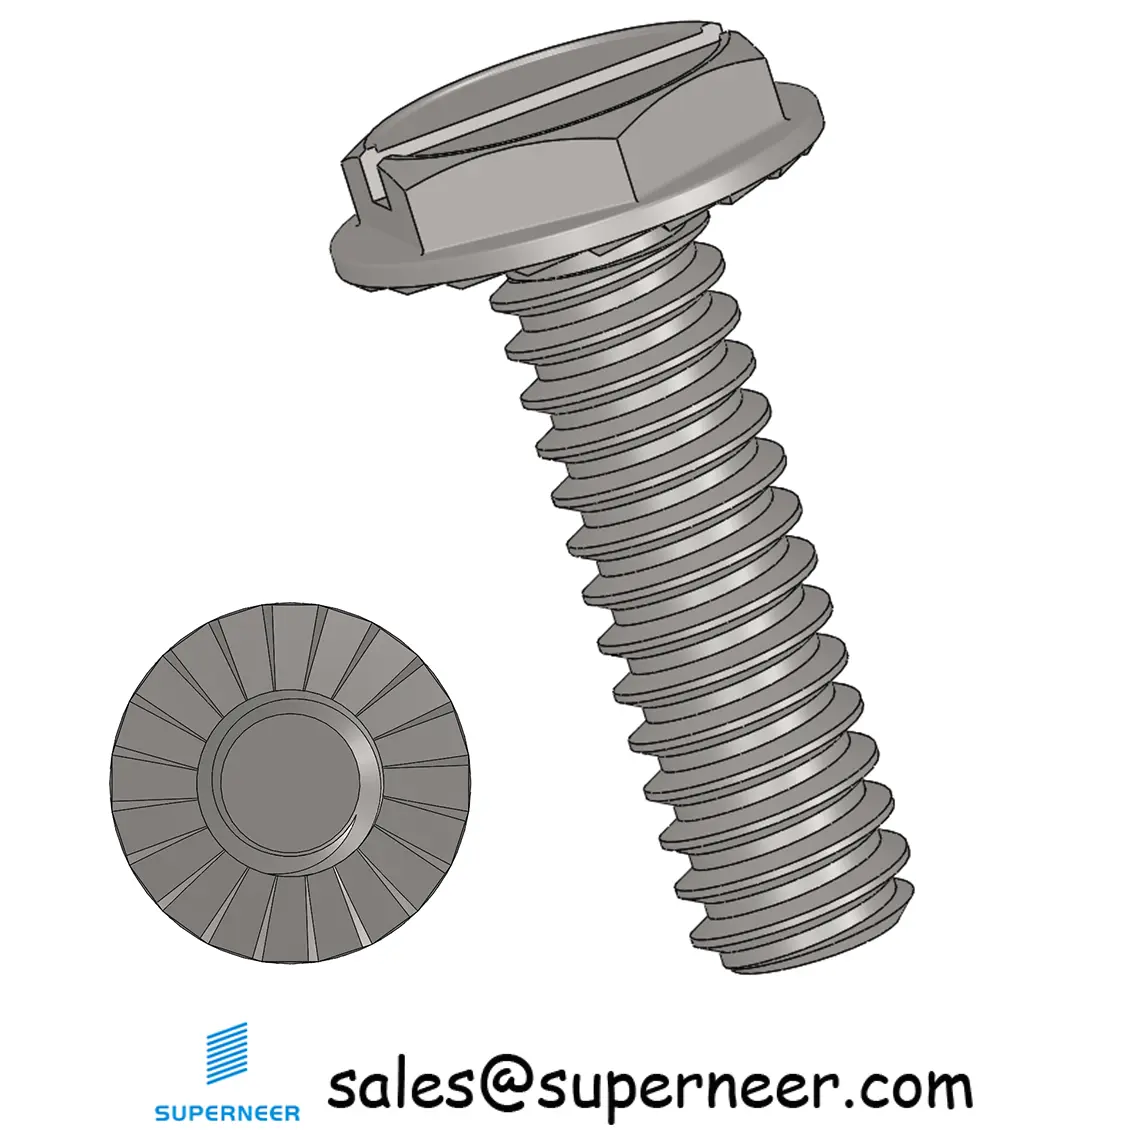 4-40 x 3/8" Indented Hex Washer Serrated Head Slotted Machine Screw SUS304 Stainless Steel Inox